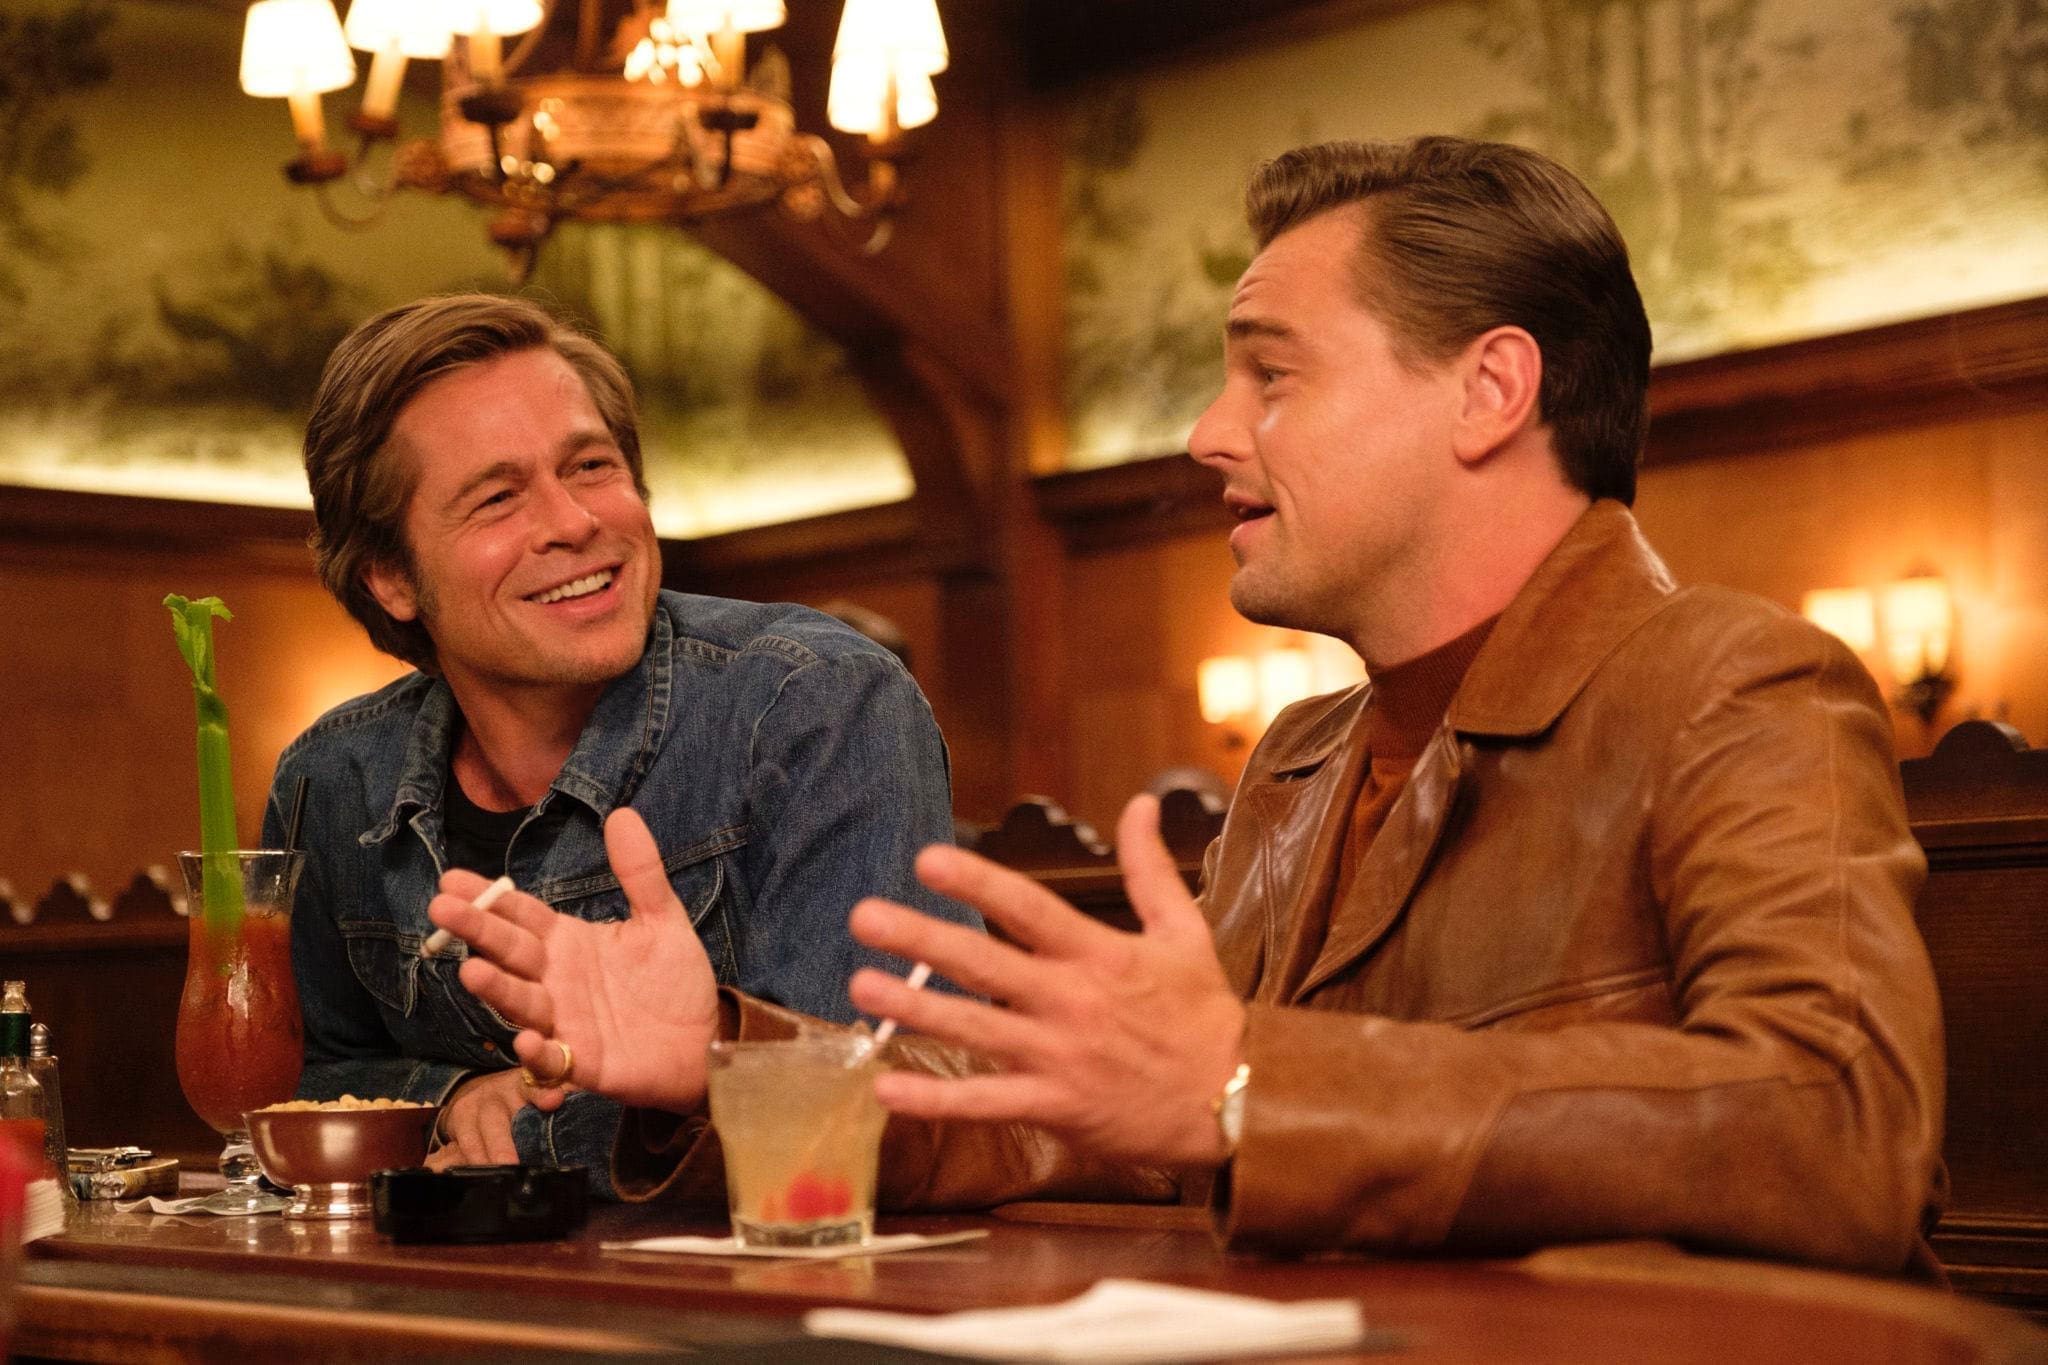 once upon a time in hollywood movie review